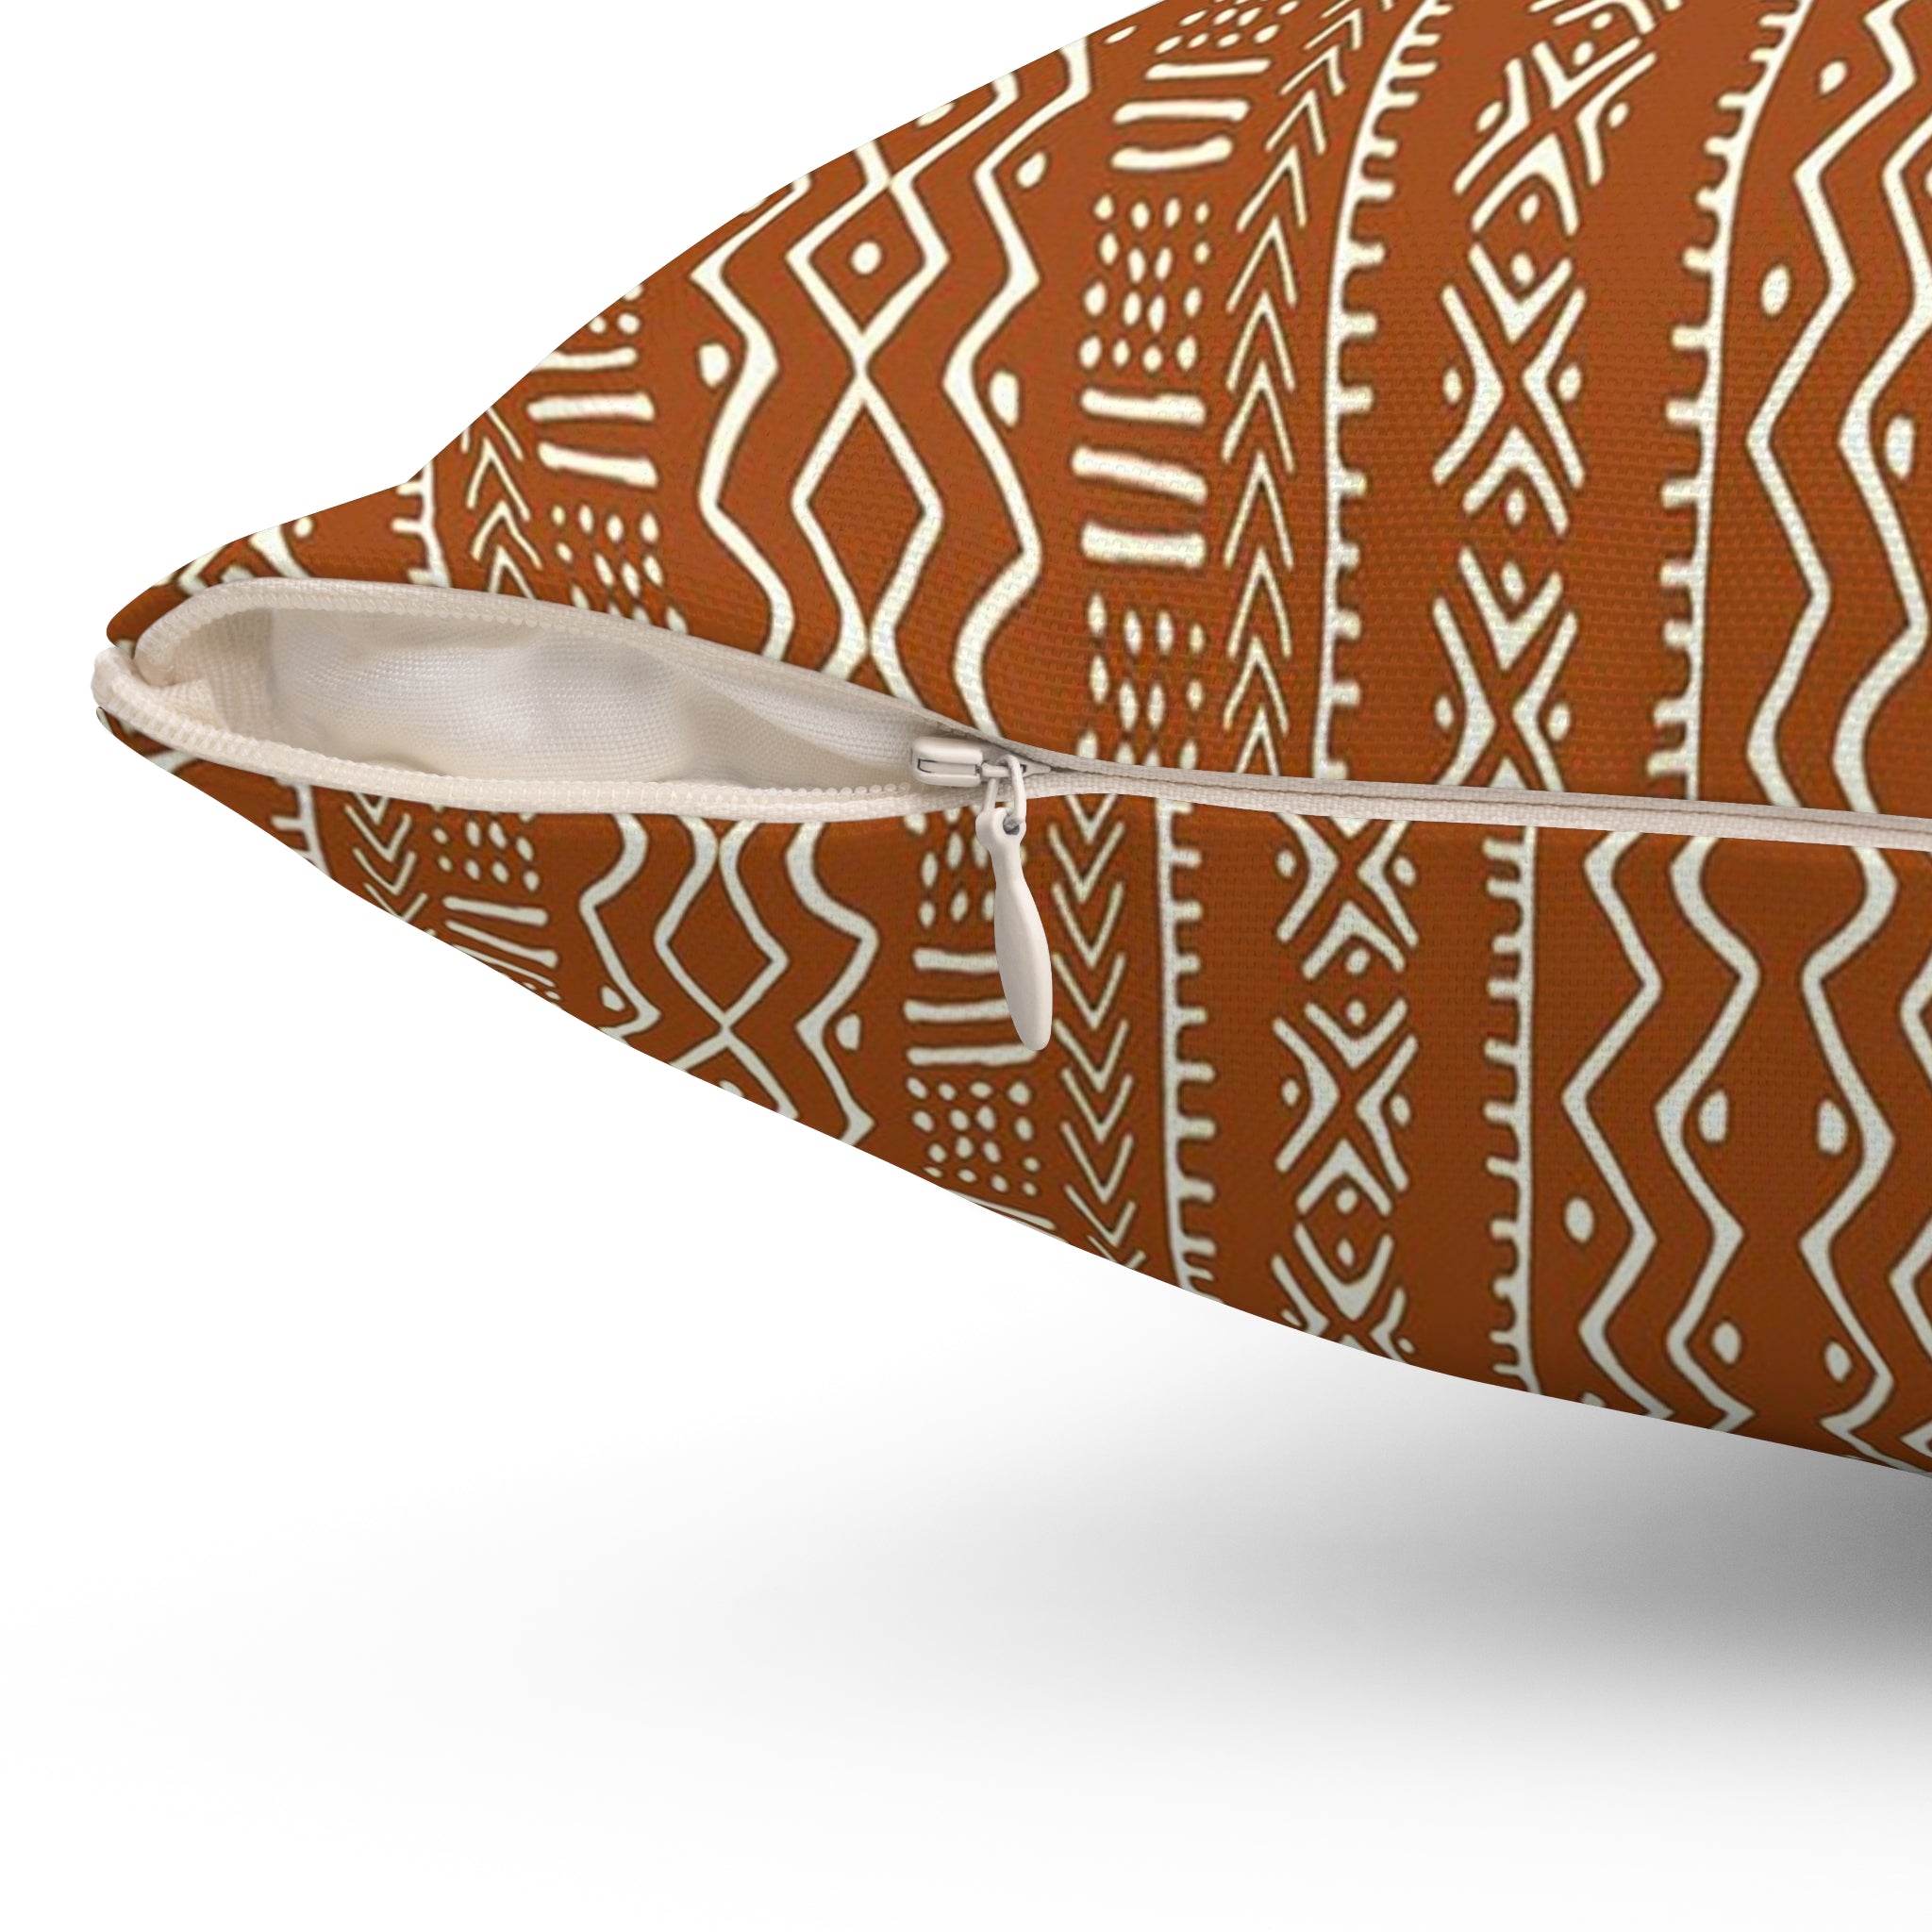 African Cushion Pillow Case Throw Cover Mudcloth Print (2 Sets)